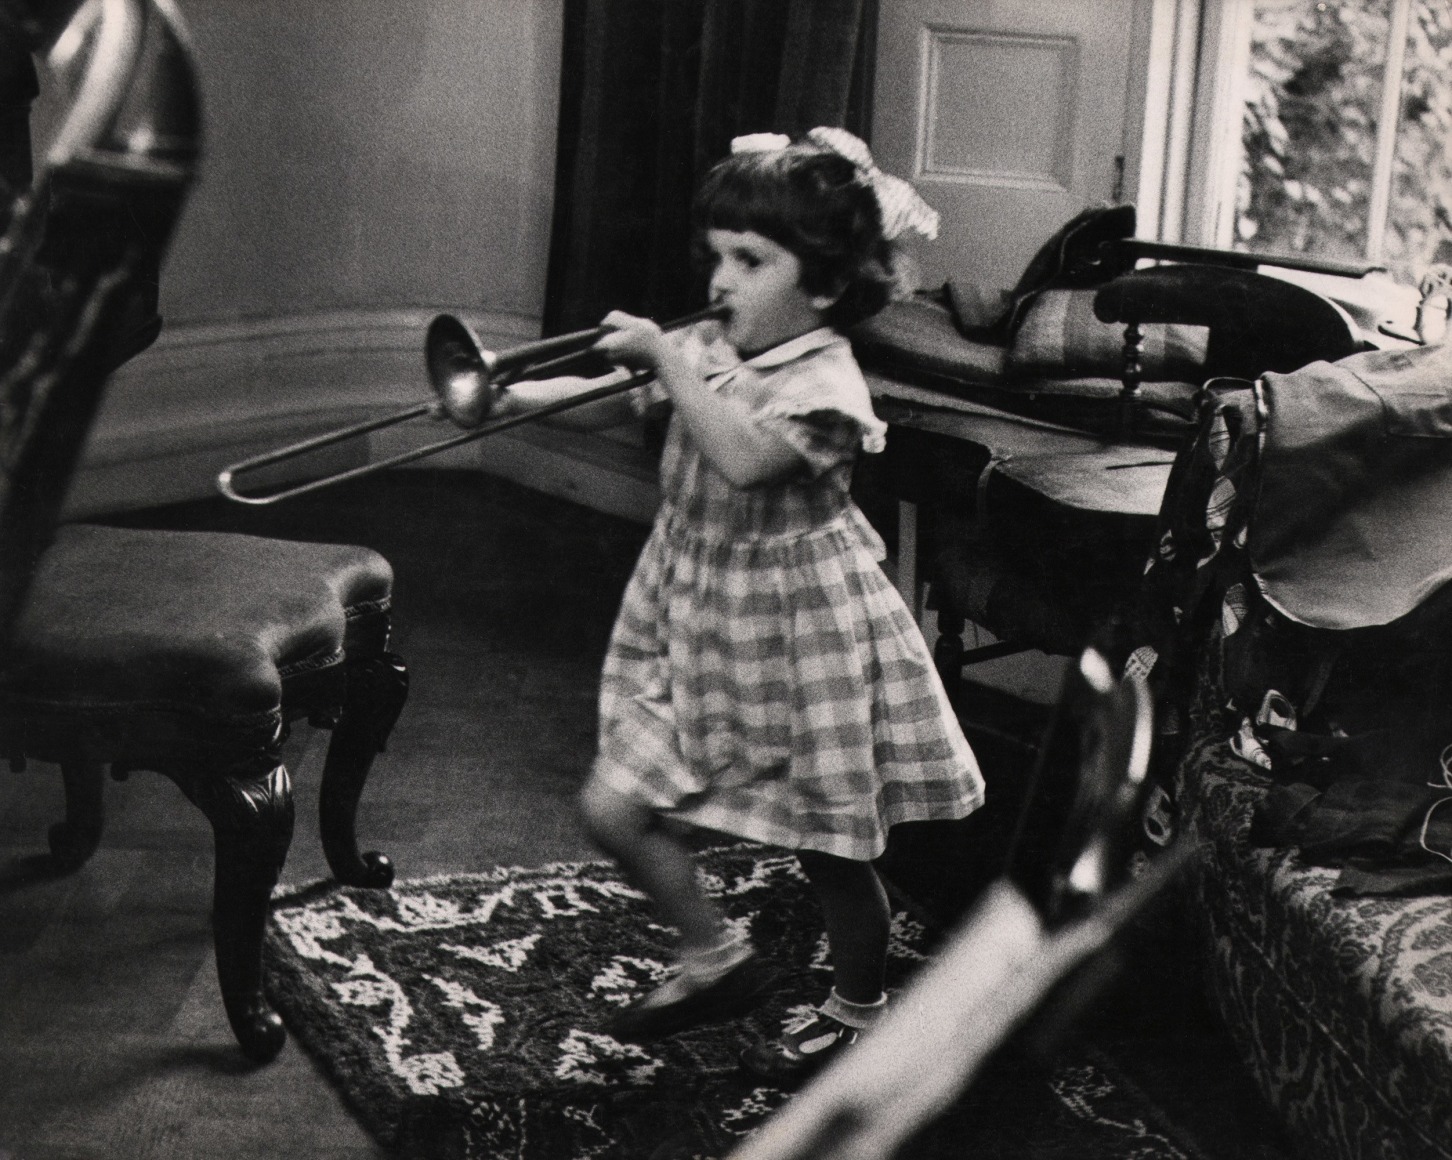 32. Grace Robertson, One of a series...on the four children of Dennis Mathews, c. 1957. A little girl in a checkered dress plays a trombone in a sitting room.